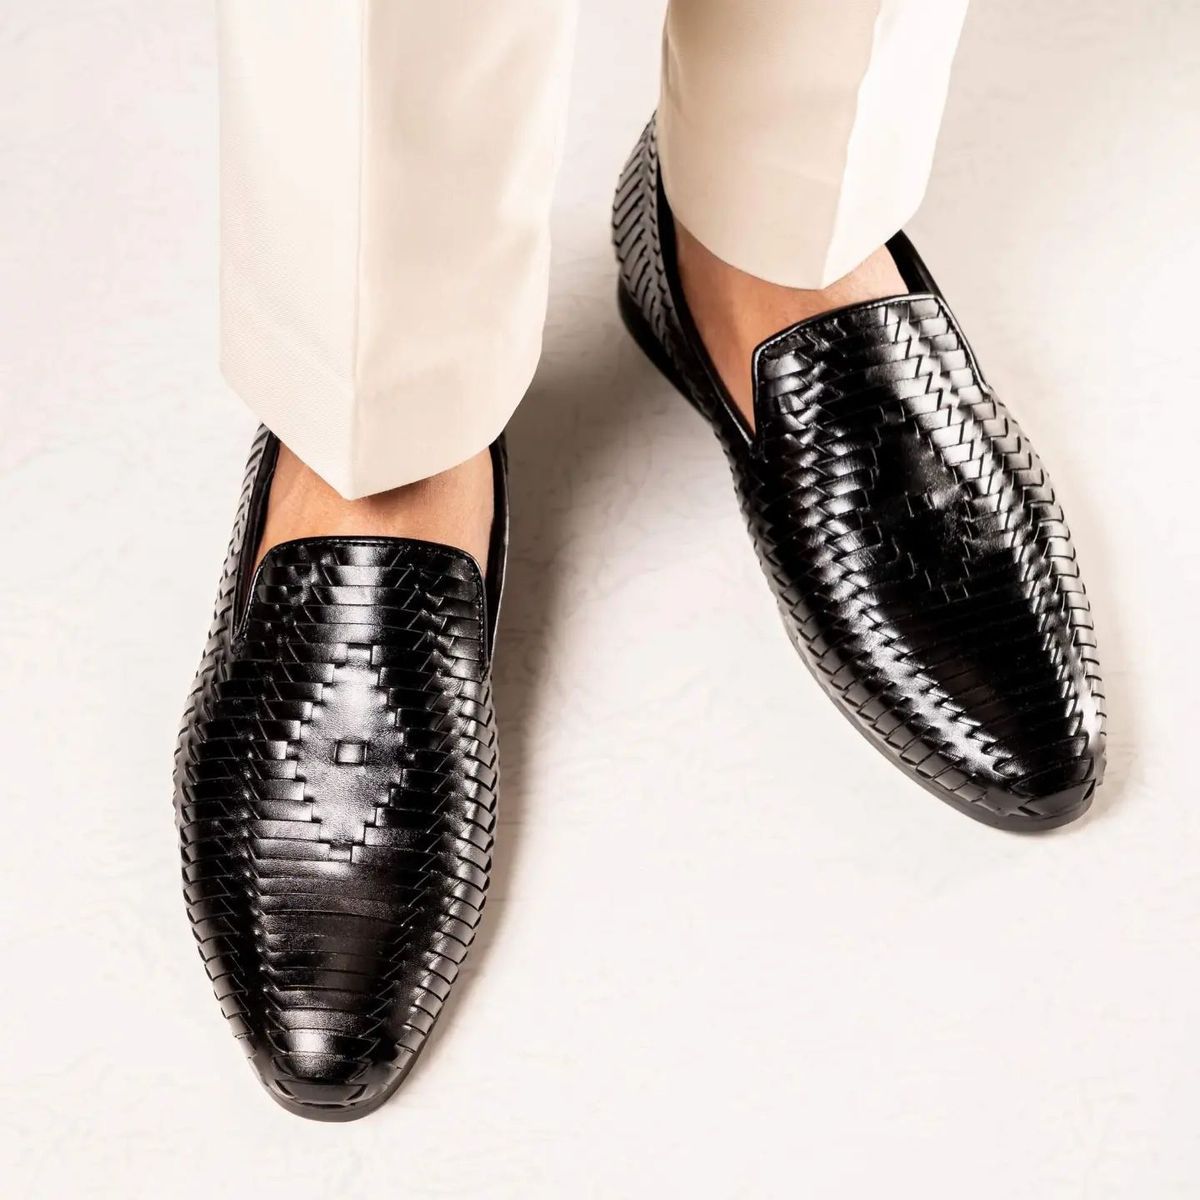 Dice Braided Loafer Image